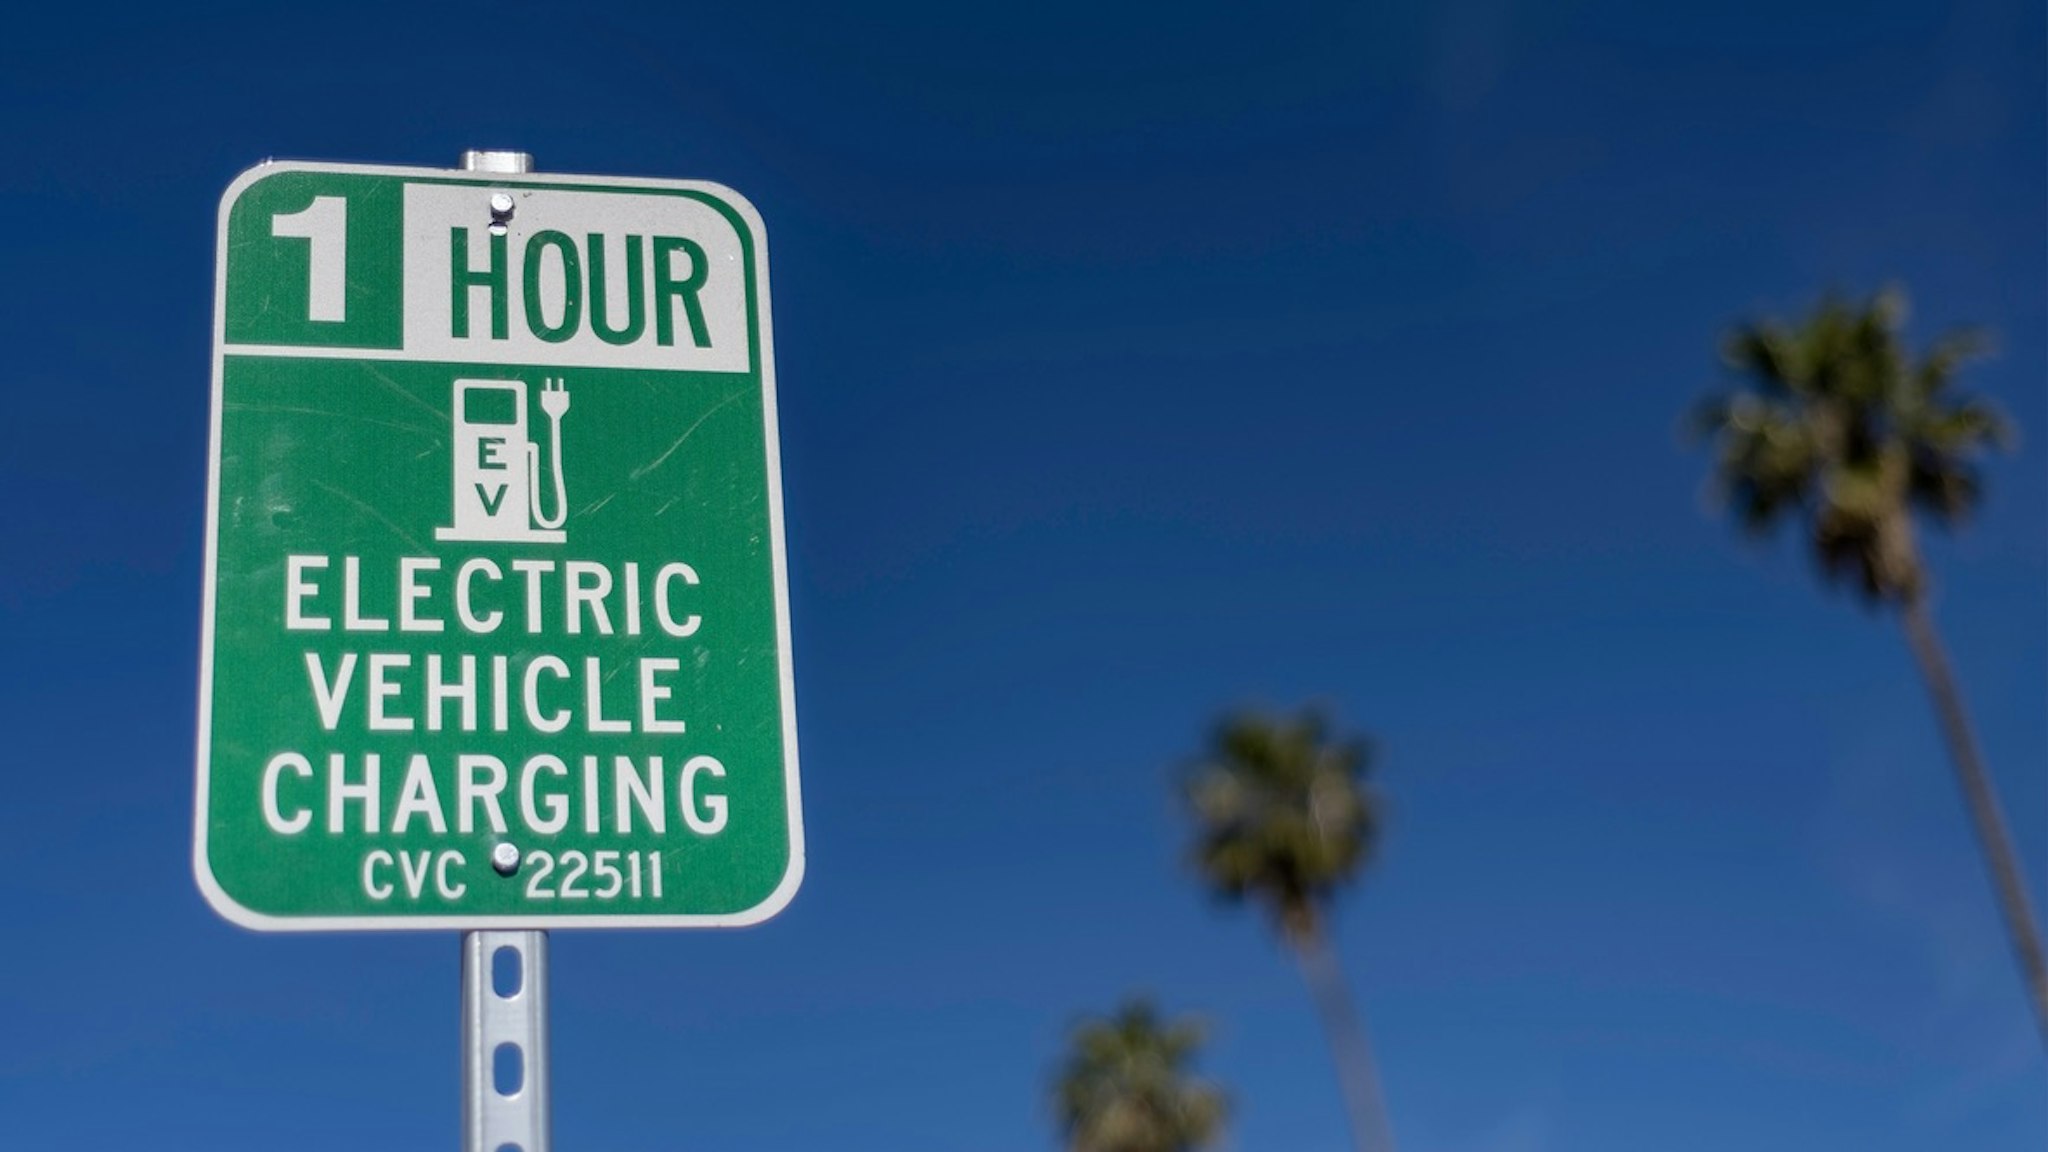 Electric Car Charging Station Sign - stock photo Electric vehicle charging station sign, Los Angeles, CA. GDMatt66 via Getty Images